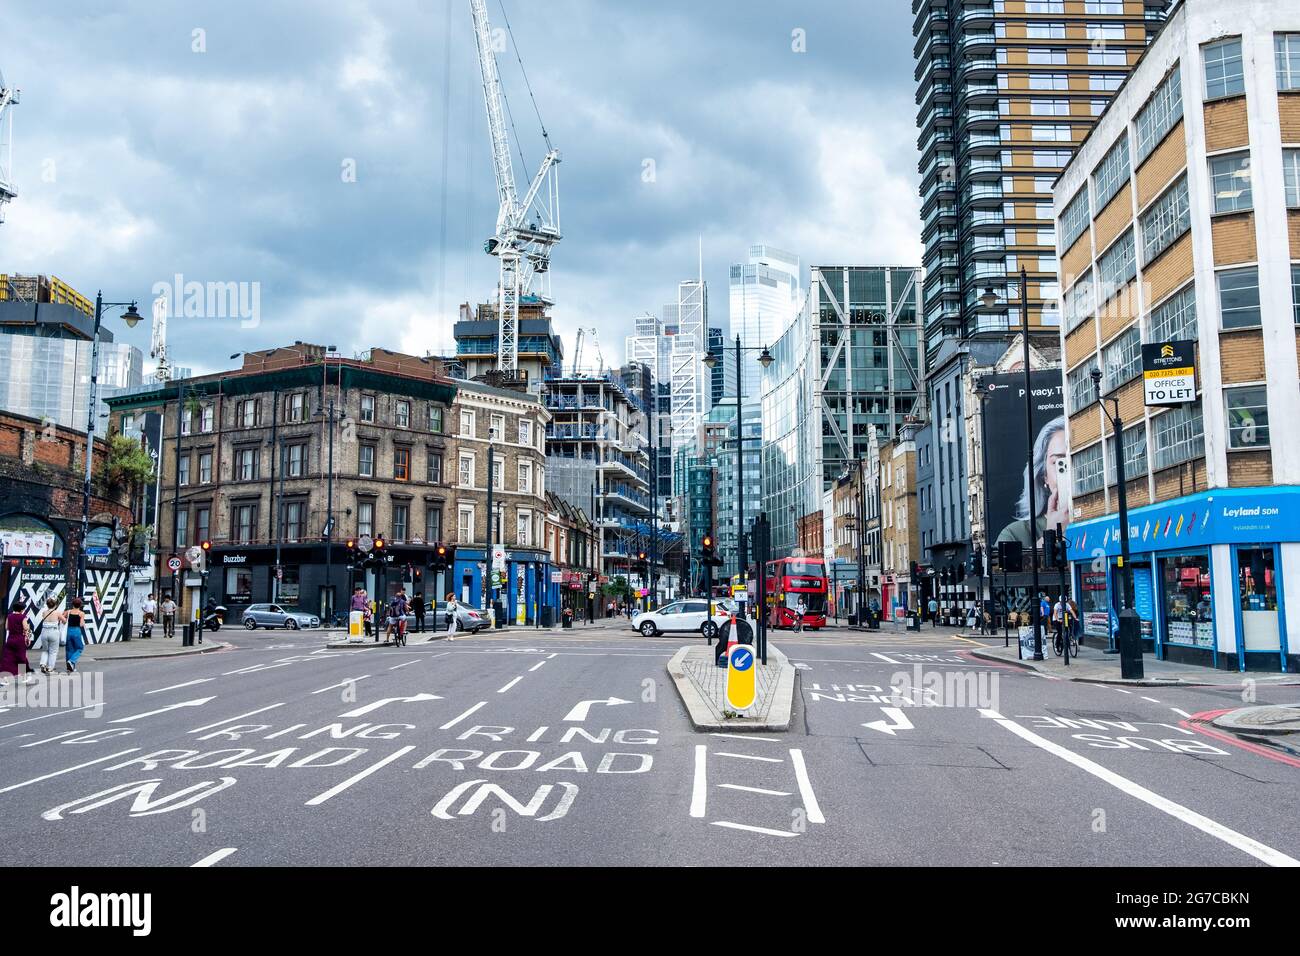 London- July, 2021: View of the City of London from Shoreditch high street Stock Photo